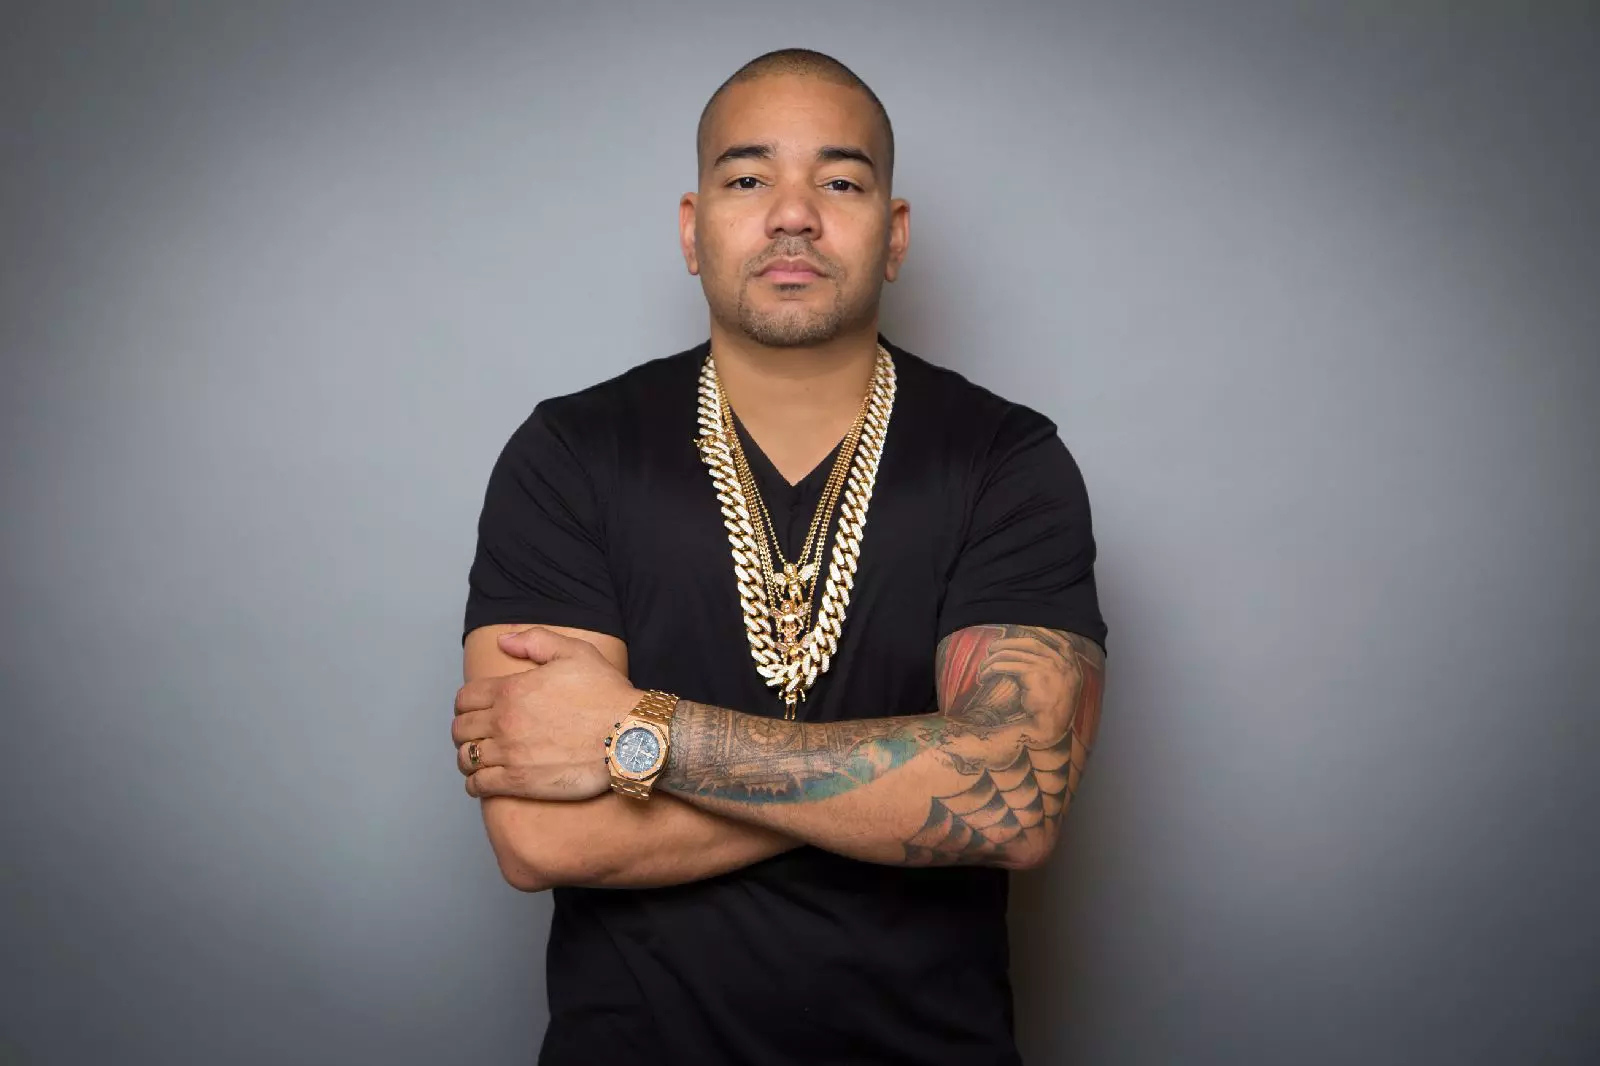 How Old Is DJ Envy?